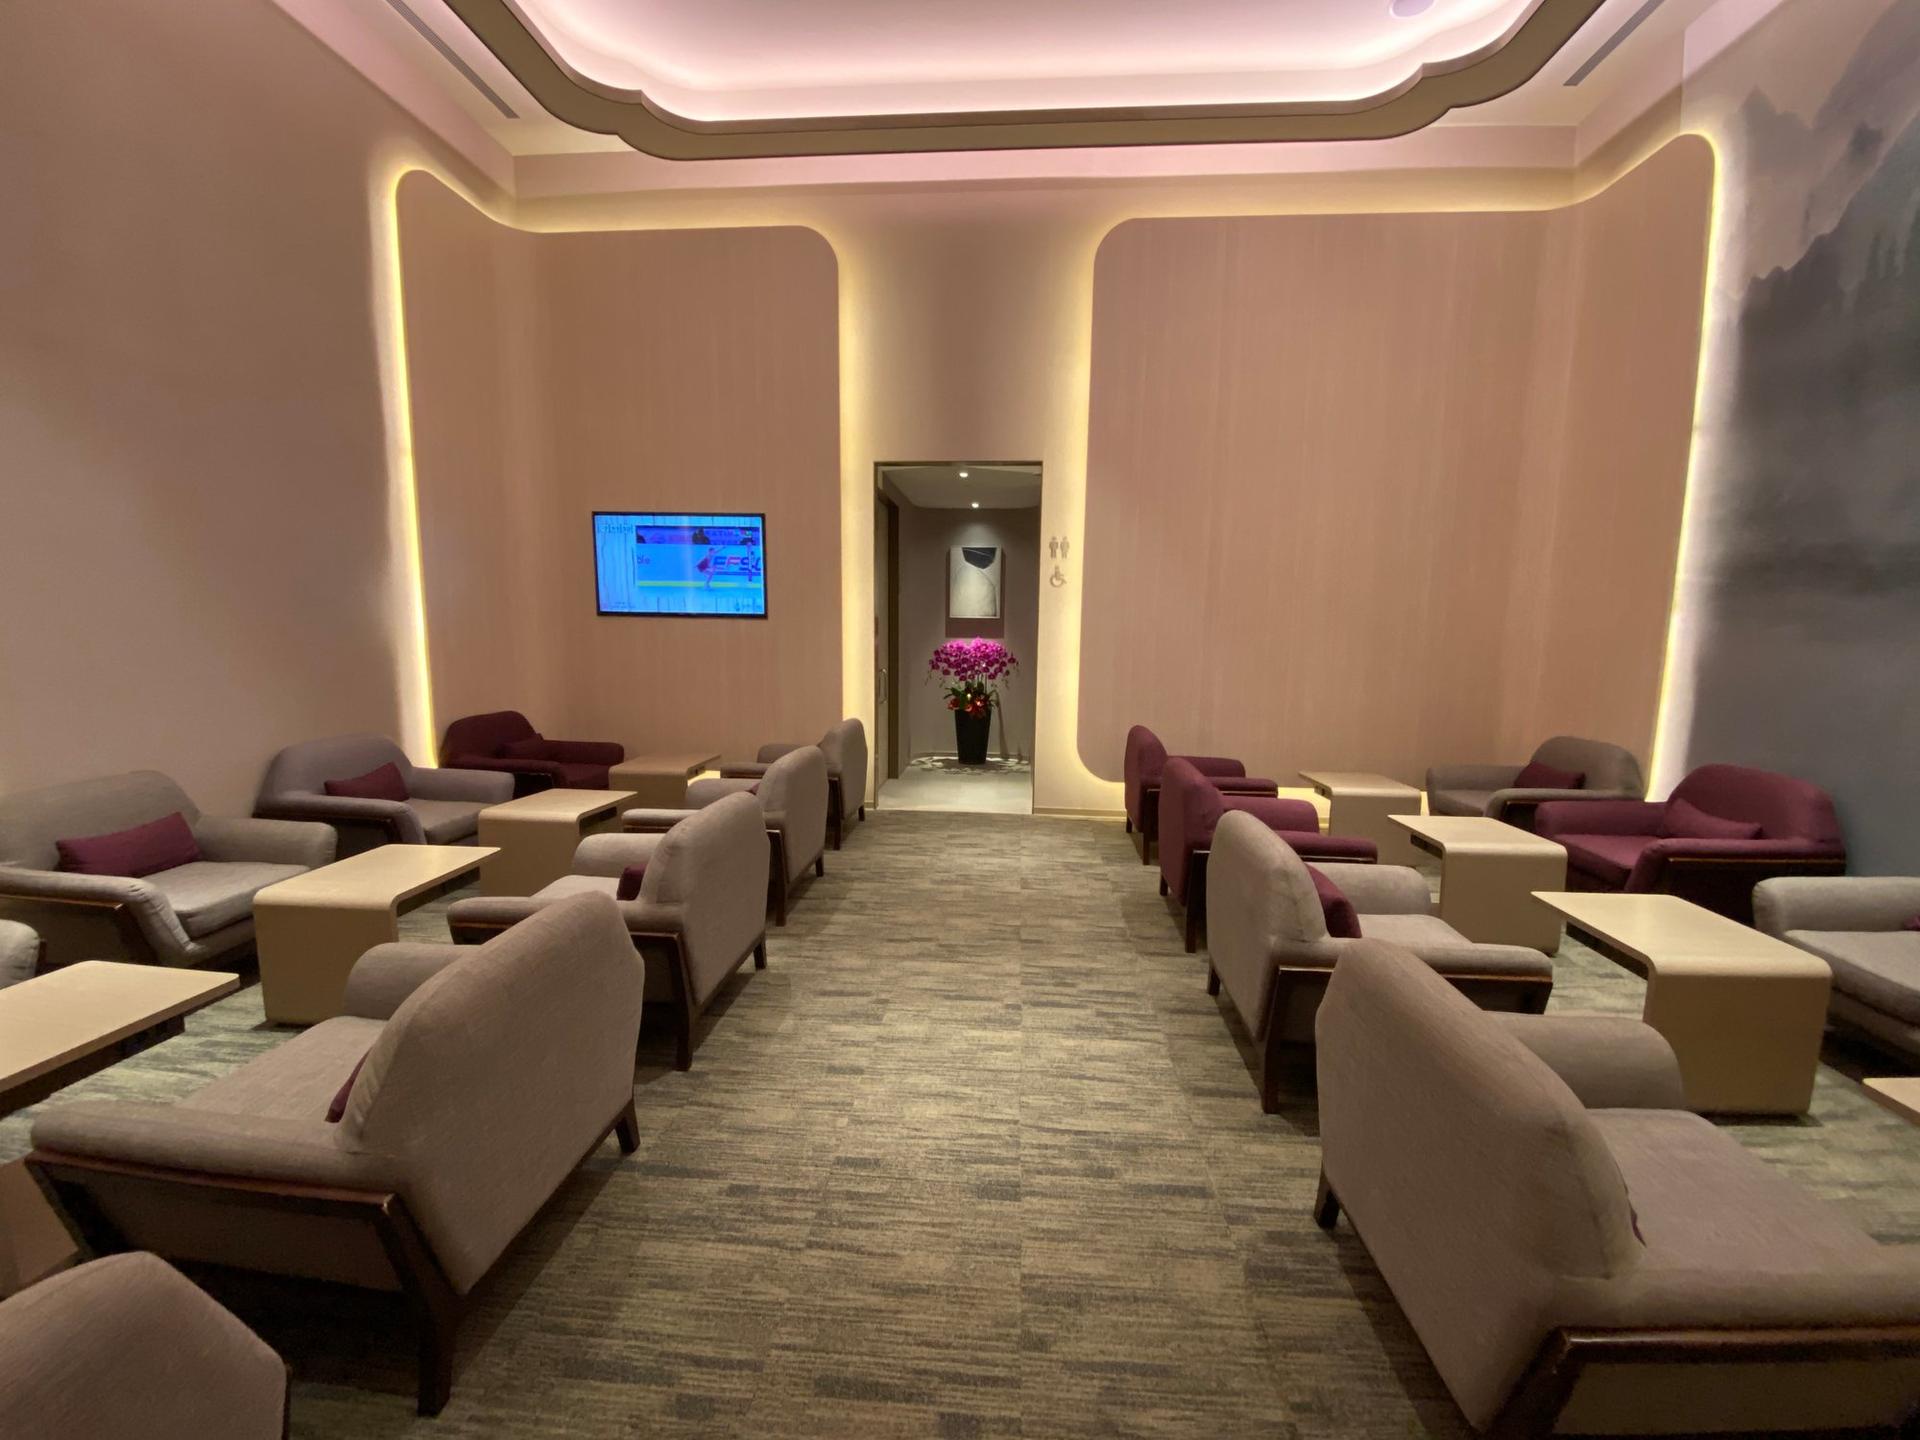 China Airlines Lounge (V2) image 11 of 20